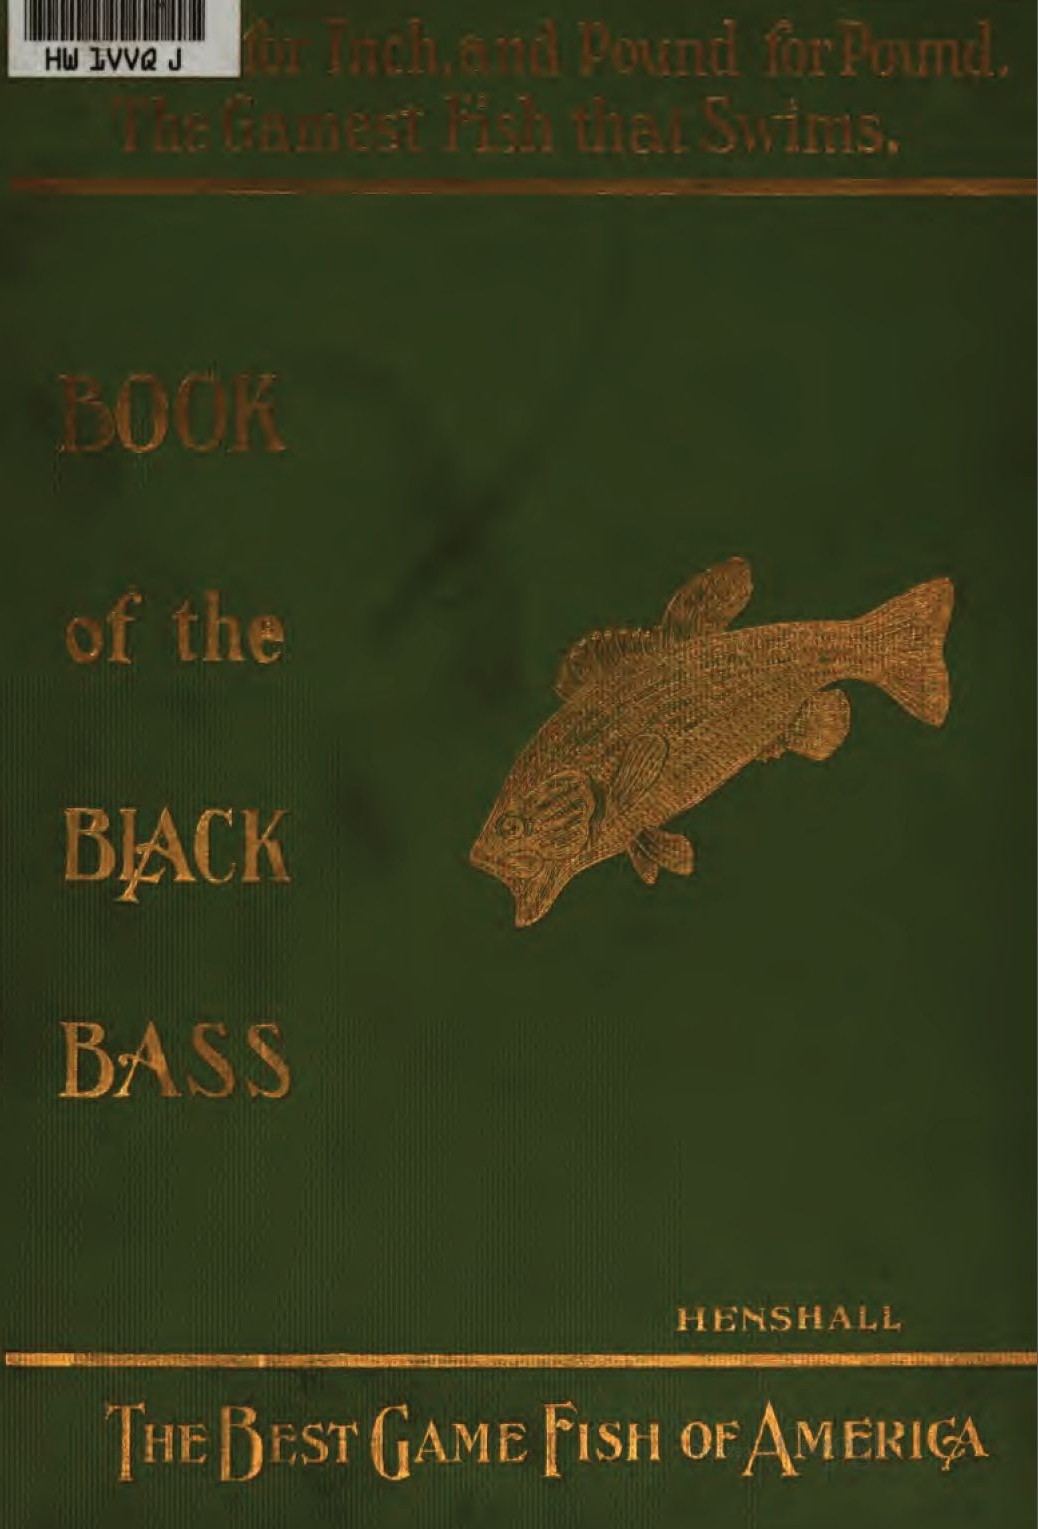 Book of the Black Bass - Wikipedia